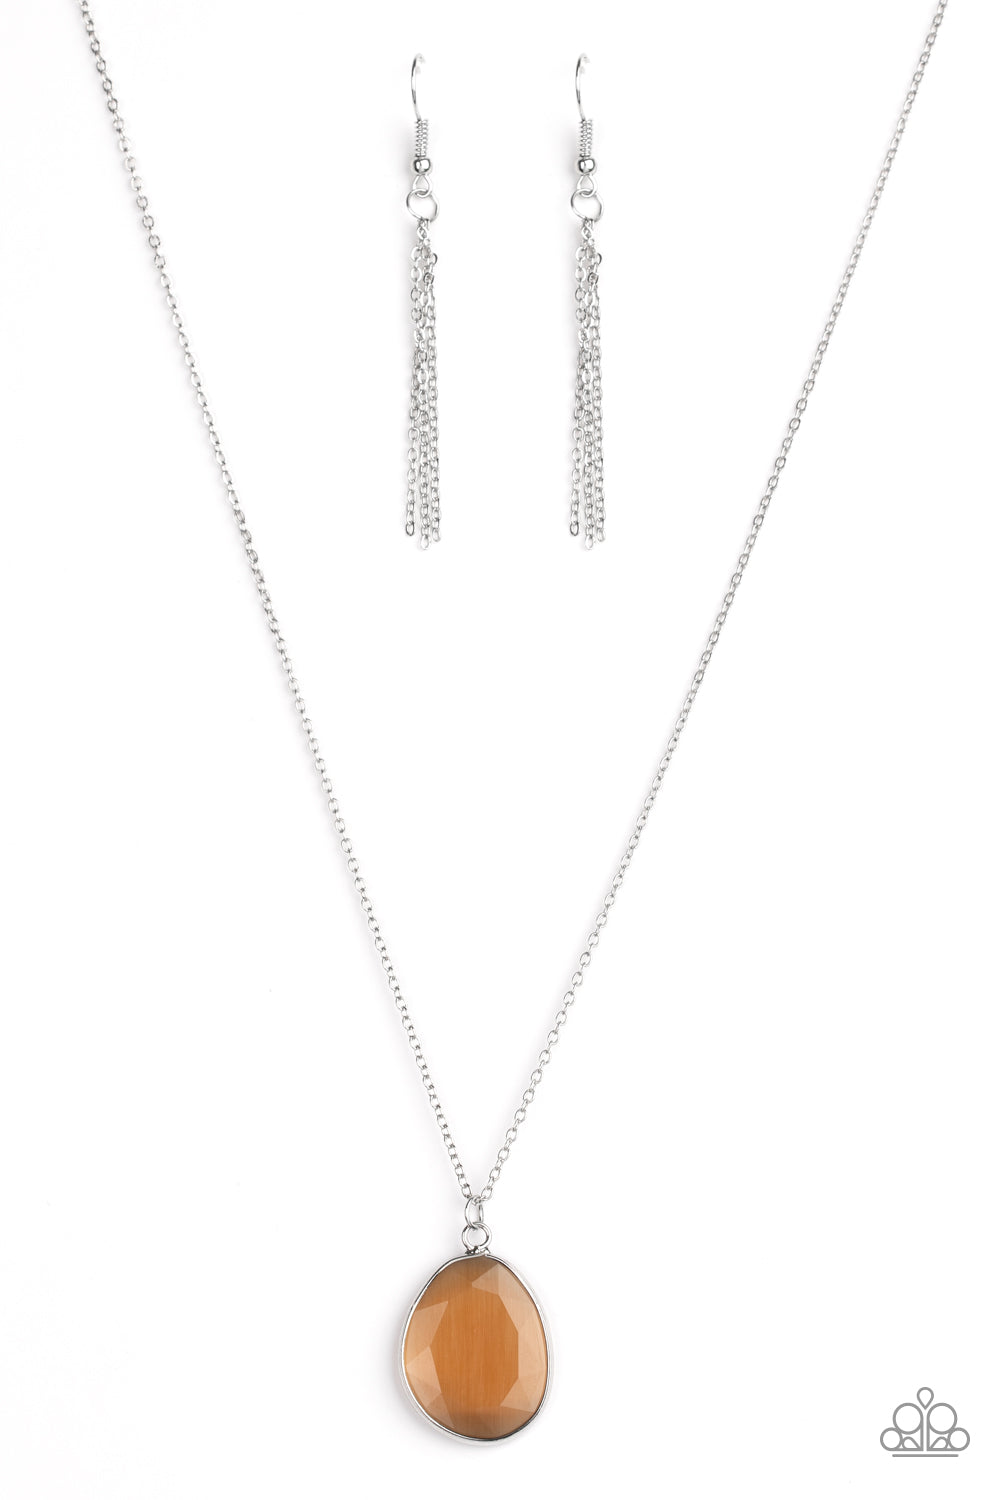 Paparazzi Necklaces - Icy Opalescence - Brown